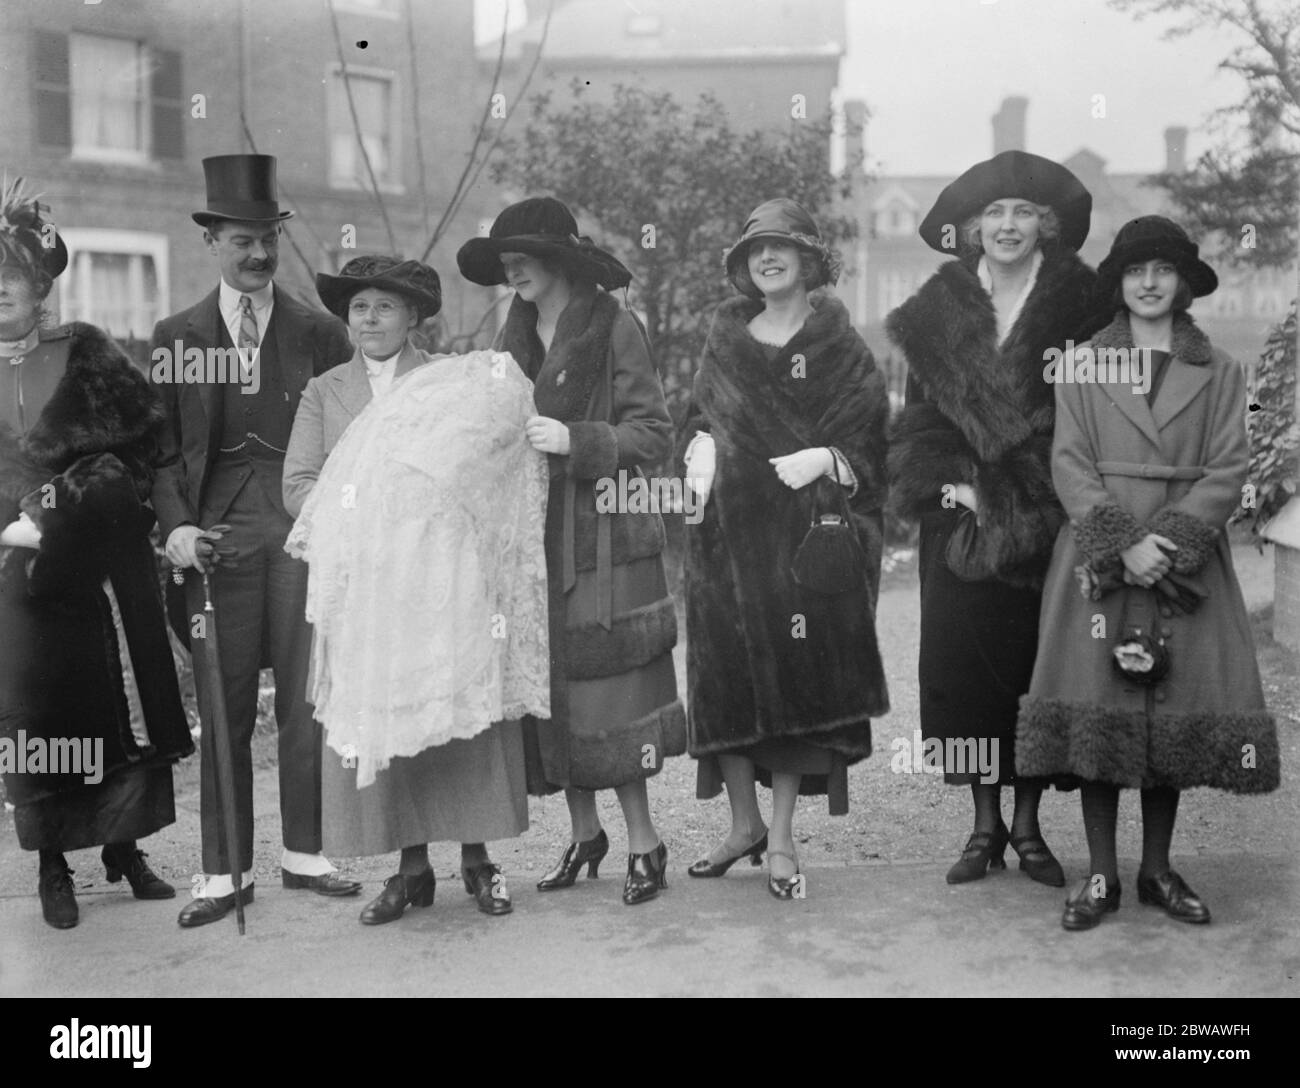 Major and Lady Moira Combe s little daughter was christened at Holy Trinity Church Windsor on Monday afternoon . Left to right , Lady Jane Combe , Major Combe , the nurse and baby , Lady Moira Combe , Hon Mrs Wilfred Egerton , Lady Clonmell and Lady Sheila Scott (Lady Moira's sister) 6 February 1922 maiden name - Lady Moira Estelle Nora Frances Scott ( daughter of Rupert Charles Scott, 7th Earl of Clonmell and his wife Rachel Berridge ) Major Henry Christian Seymour Combe Rachel Estelle Berridge , Lady Clonmell baby is Audrey Moulie Estelle Combe 6 February 1922 Stock Photo